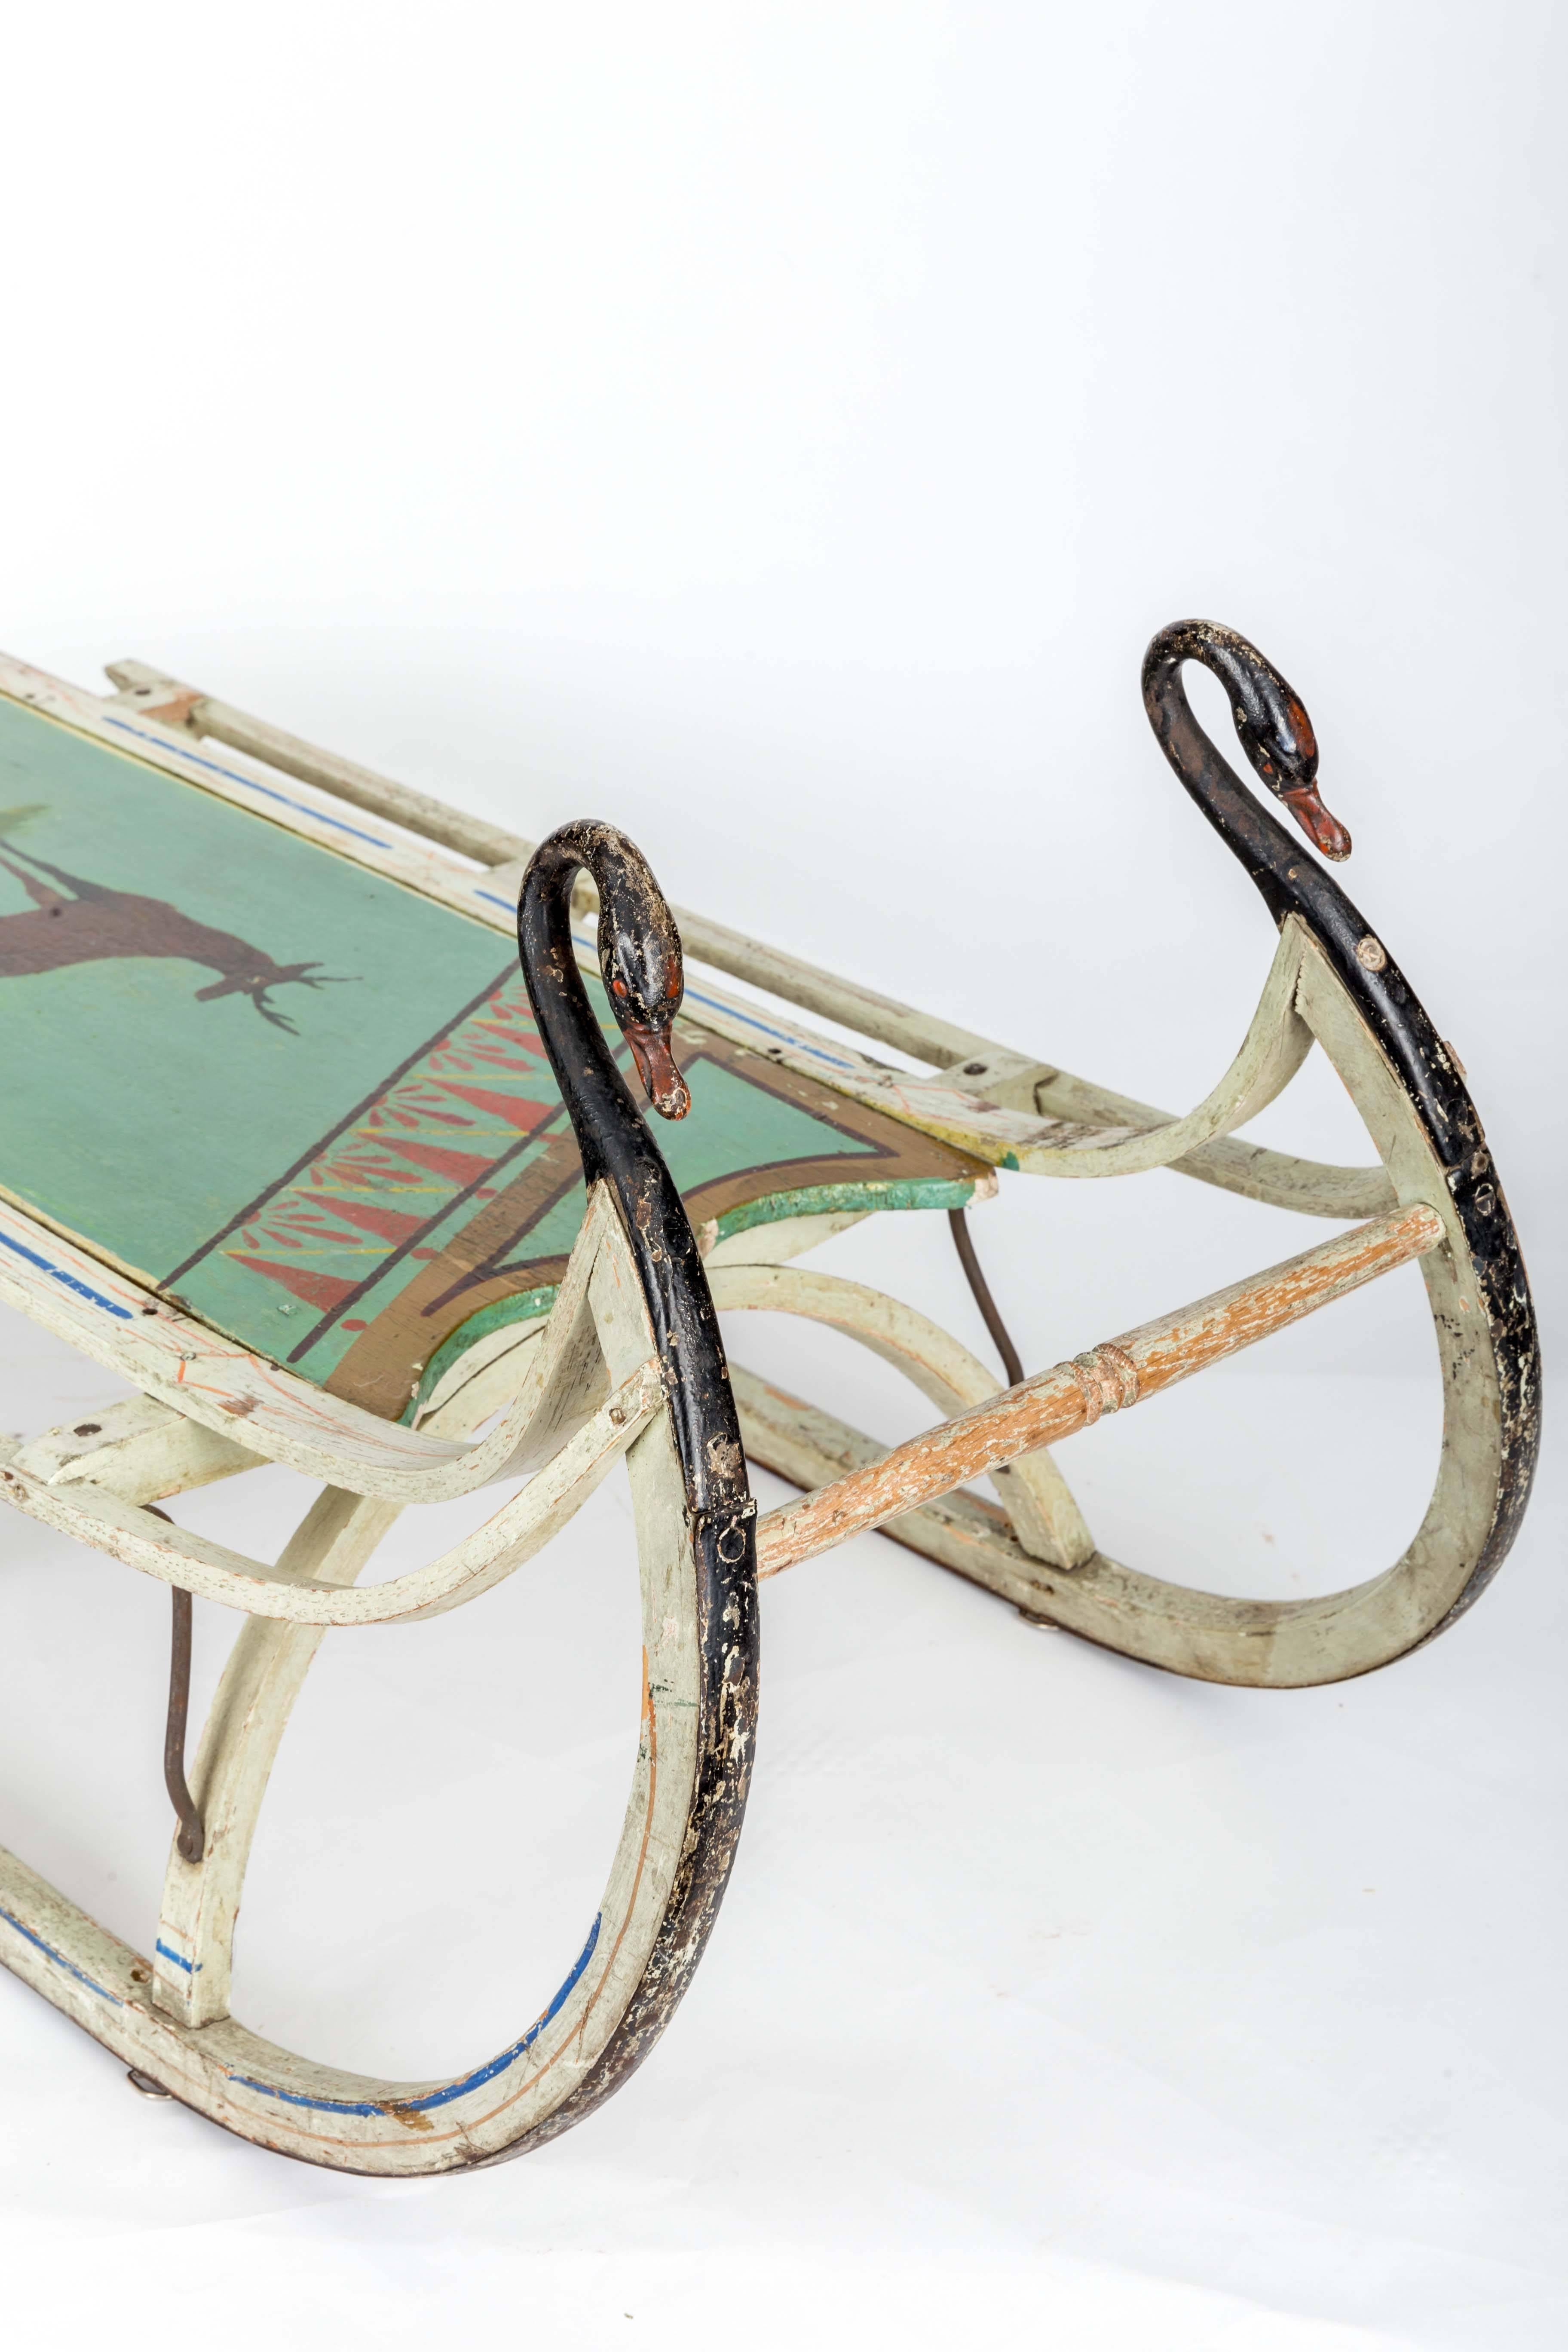 19th Century 19th-Century Wooden Sled with Original Paint and Iron Swan Runners